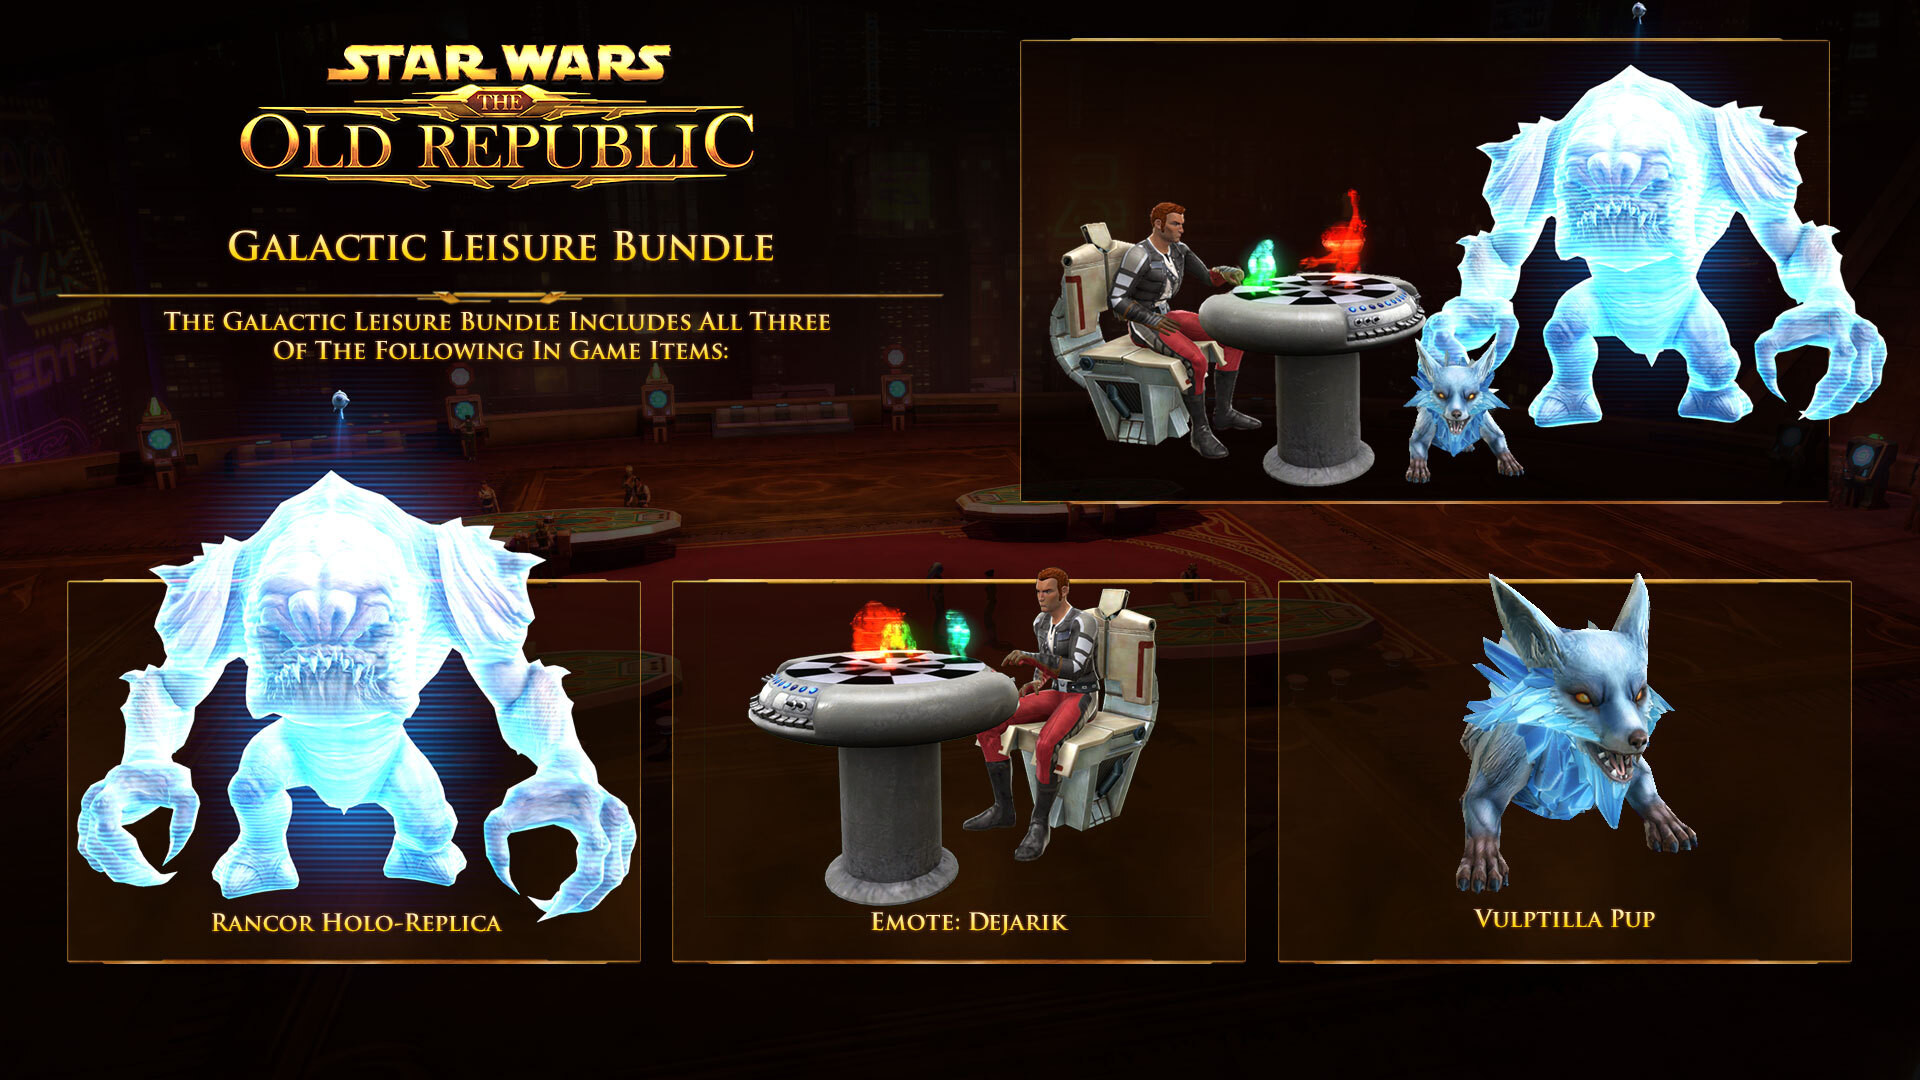 STAR WARS™: The Old Republic - Galactic Leisure Bundle Featured Screenshot #1